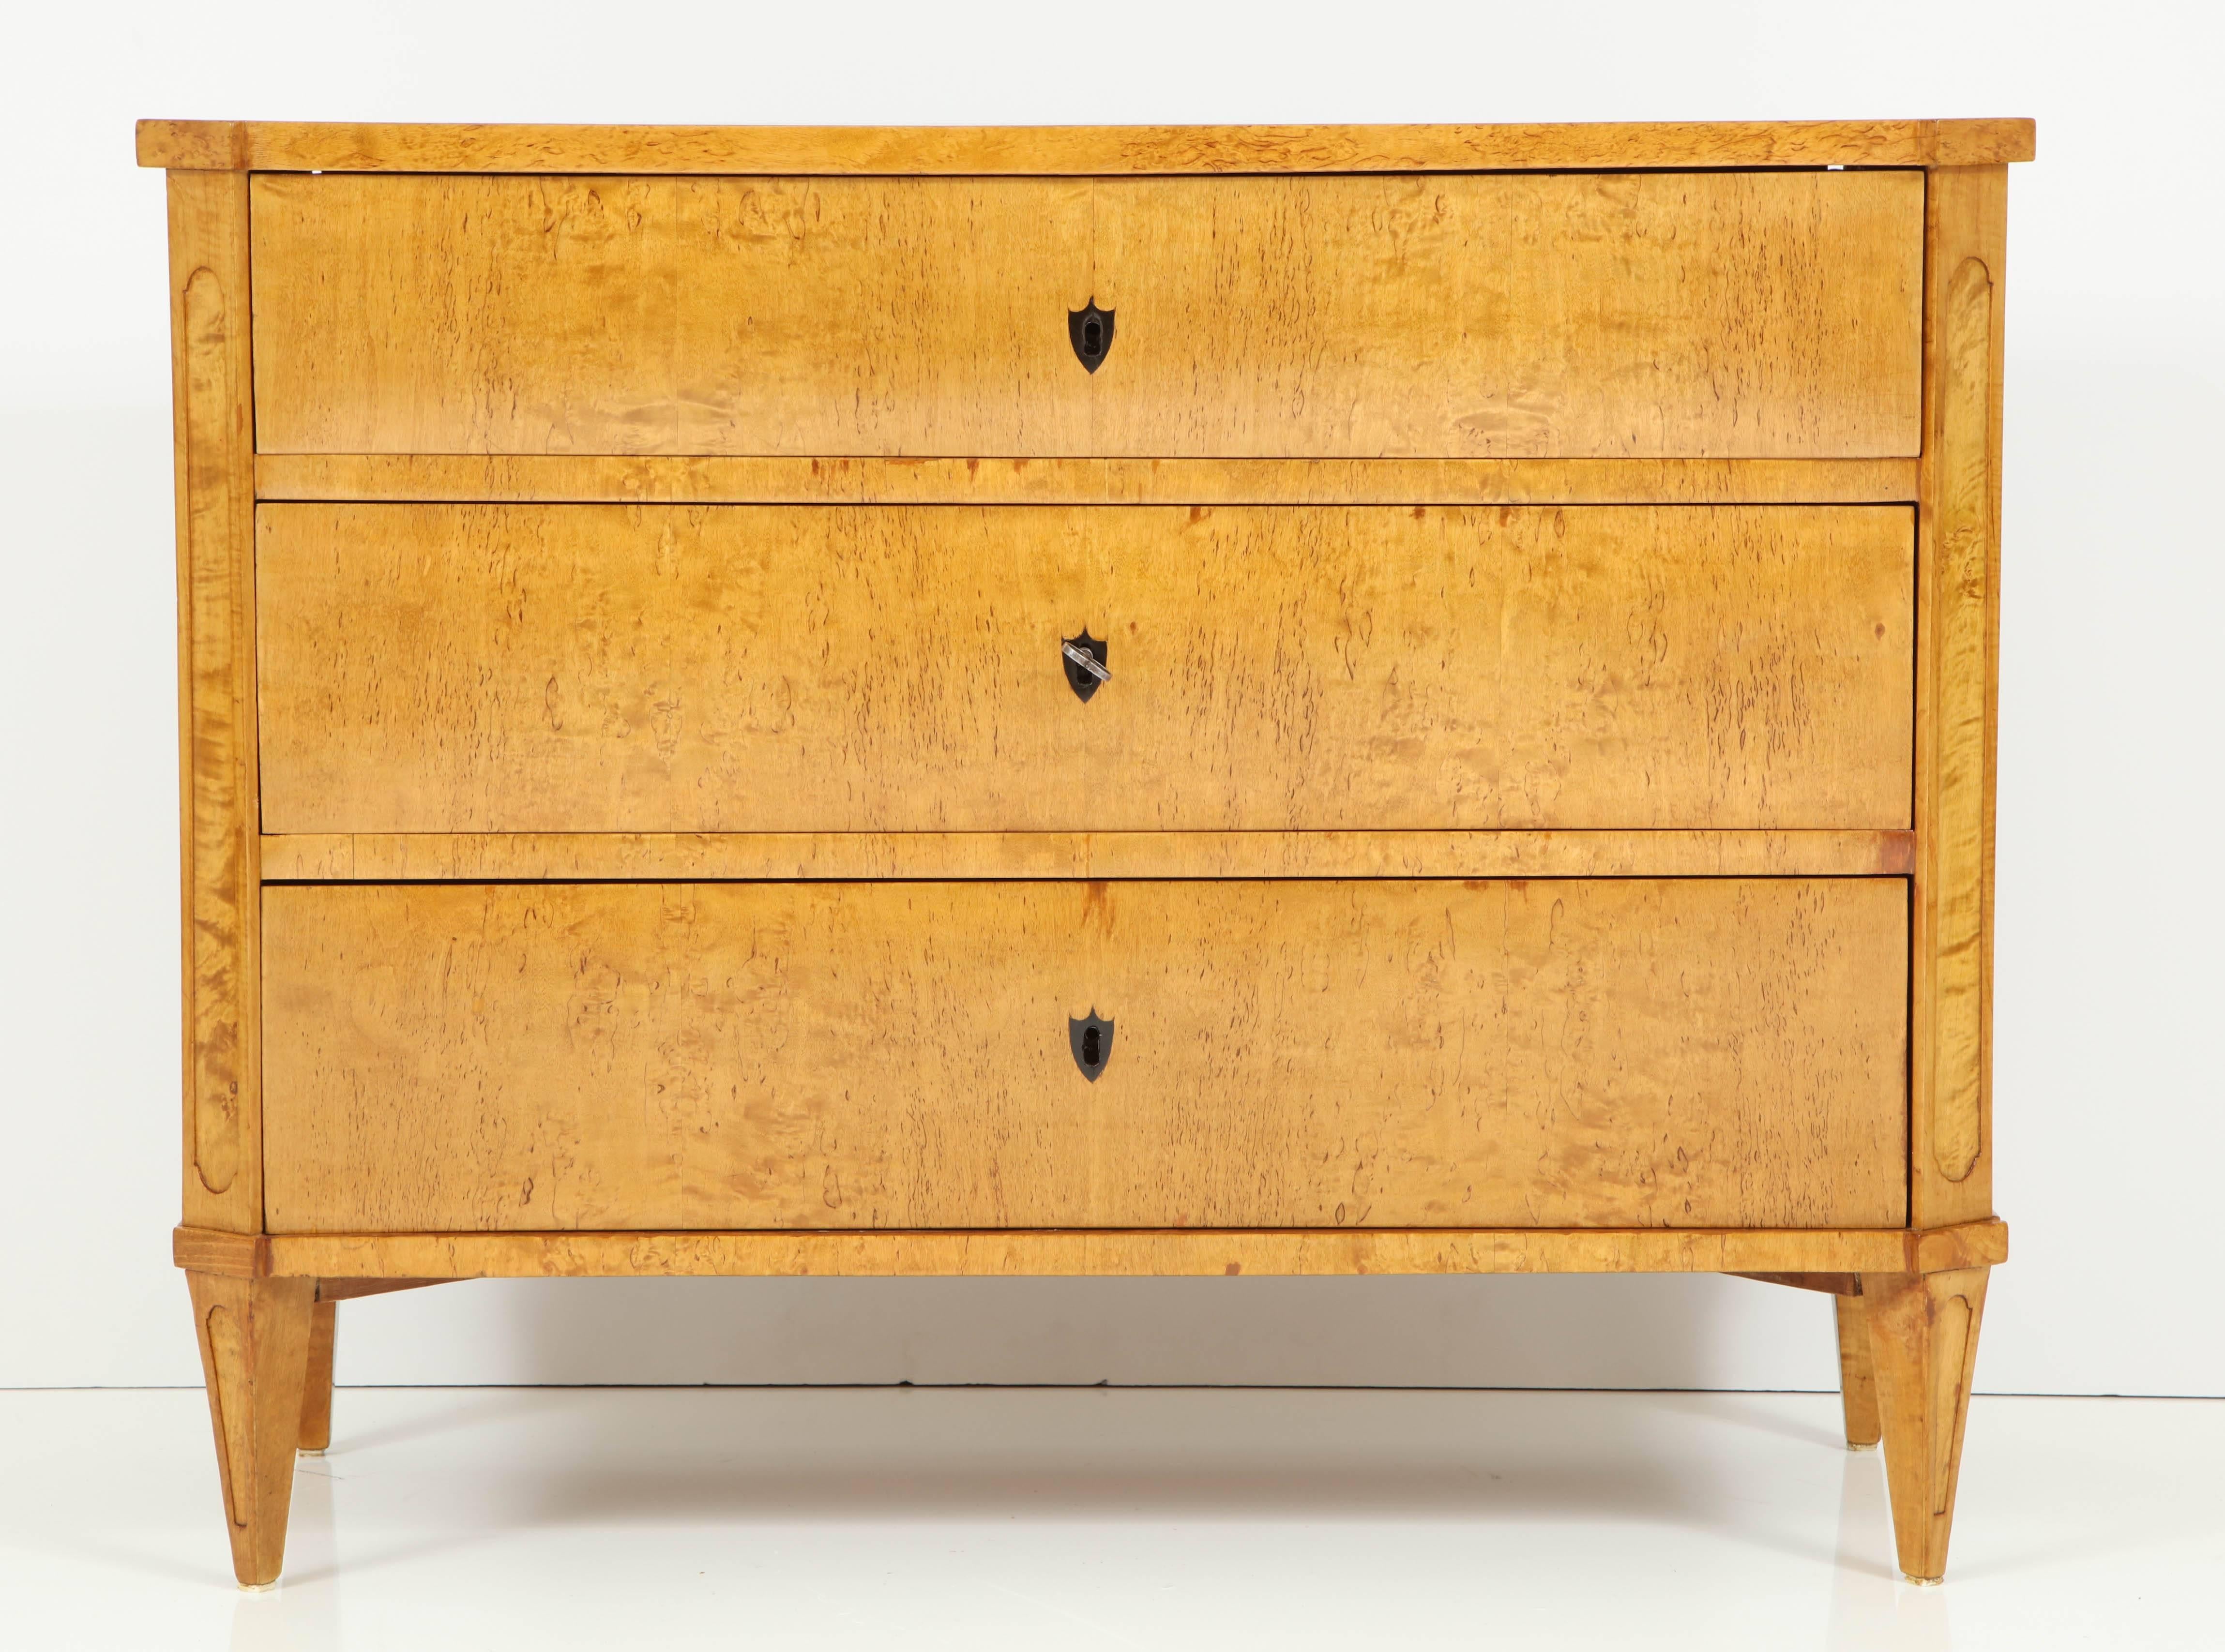 A Swedish late Gustavian/early Karl Johan, birch root commode, circa 1820s, the rectangular top with canted for-corners and conforming channeled sides, three long drawers, raised on square tapered and channeled legs.

